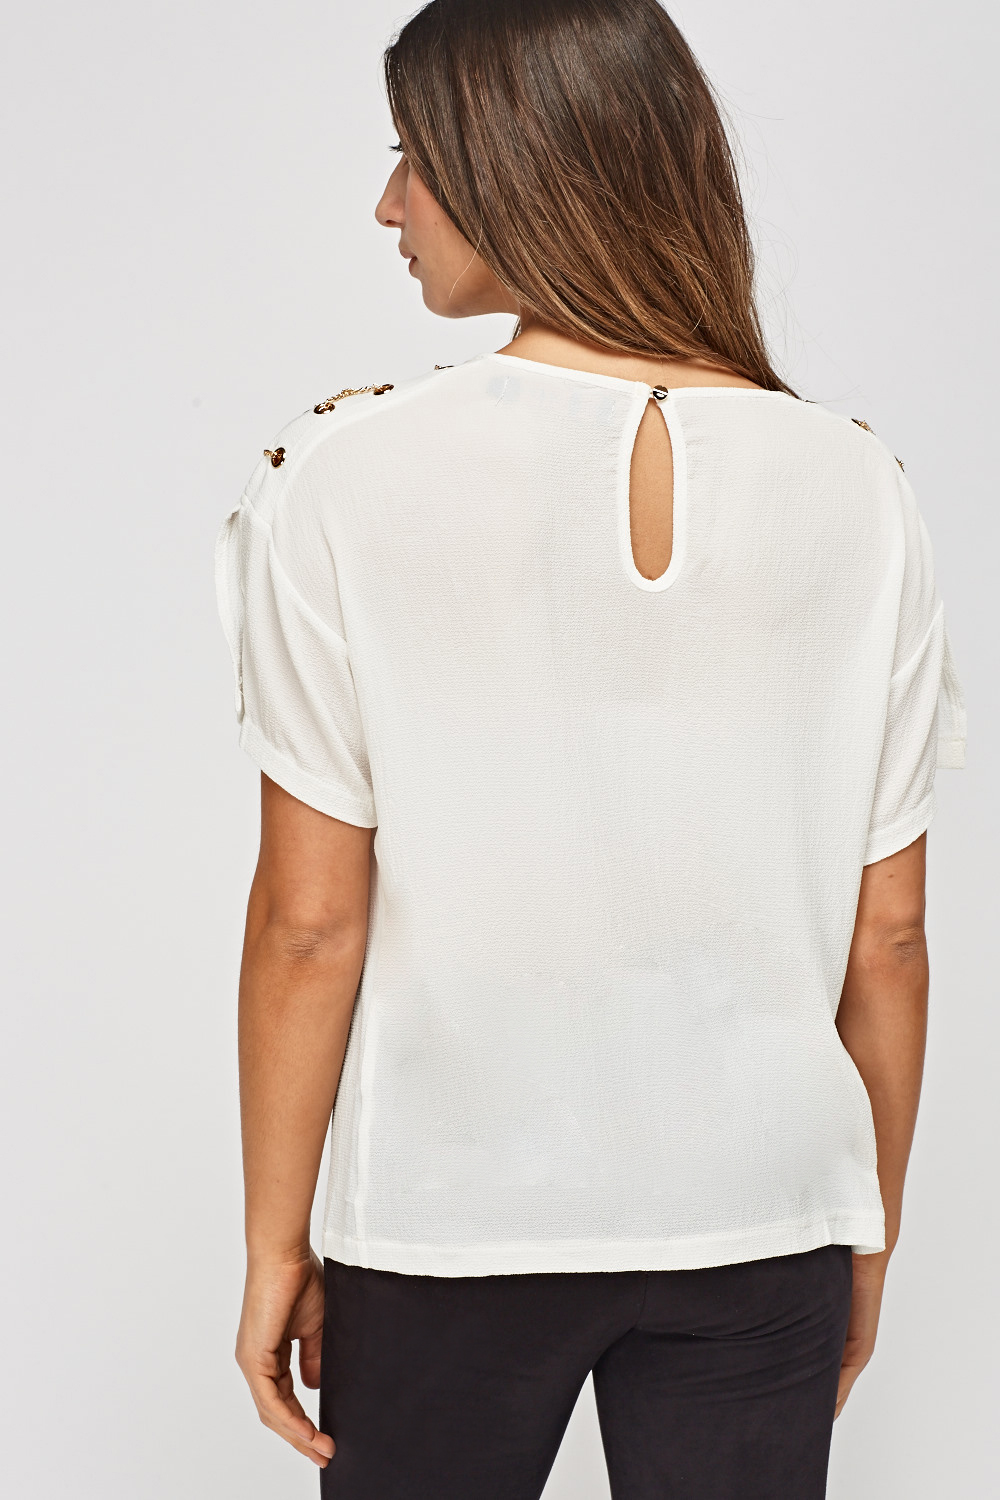 Chain Detailed Sleeve Top - Just $7